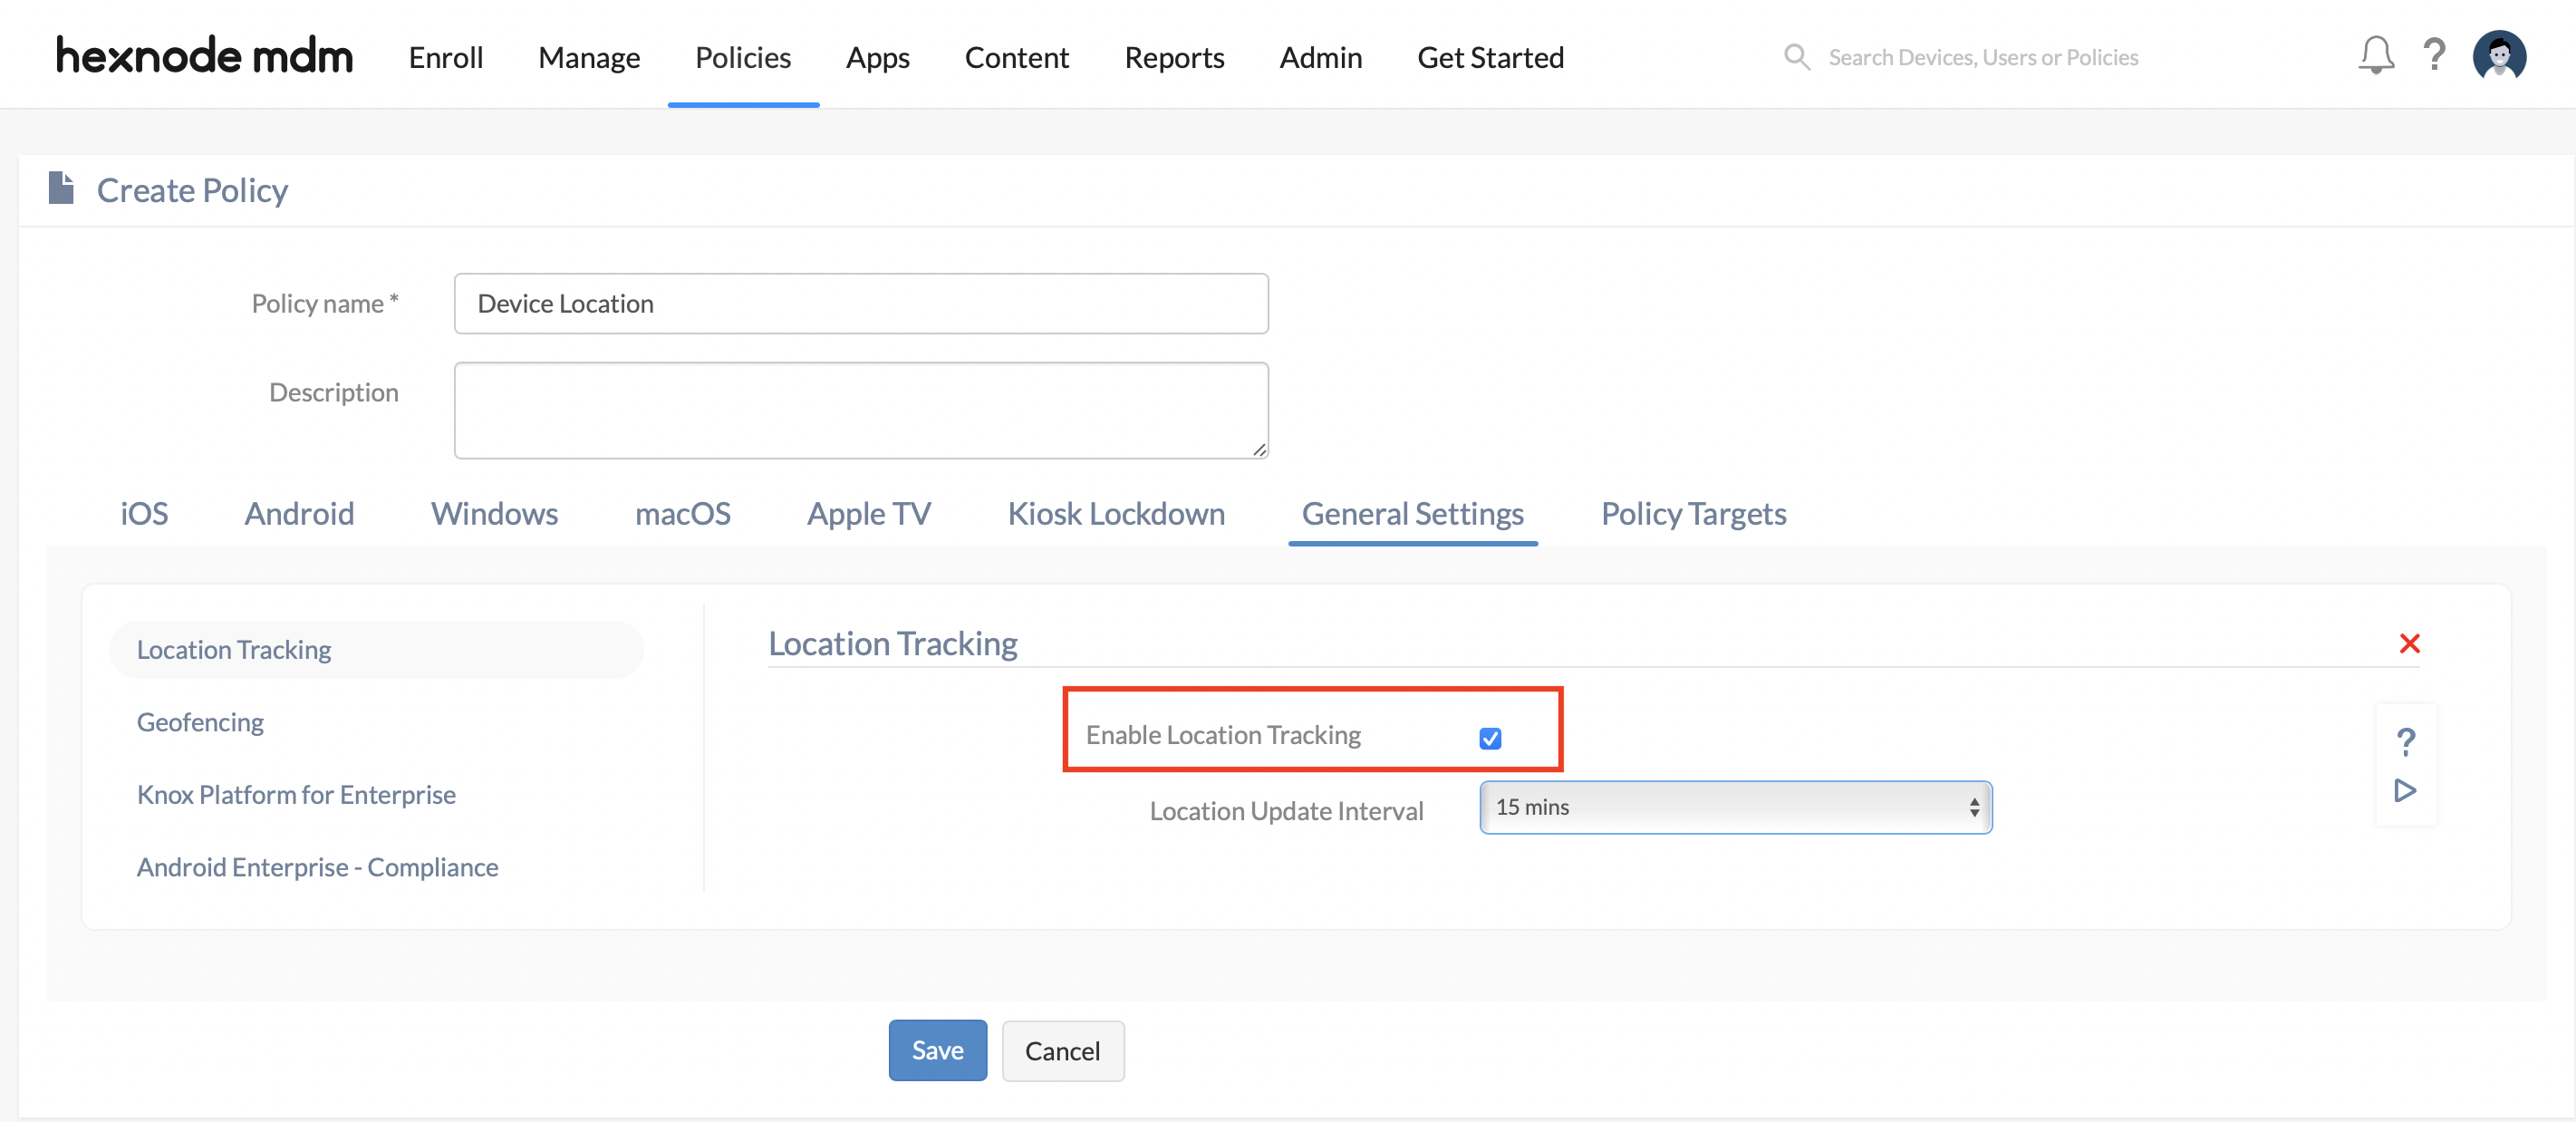 Associate Policy to Enable Location Tracking on Devices